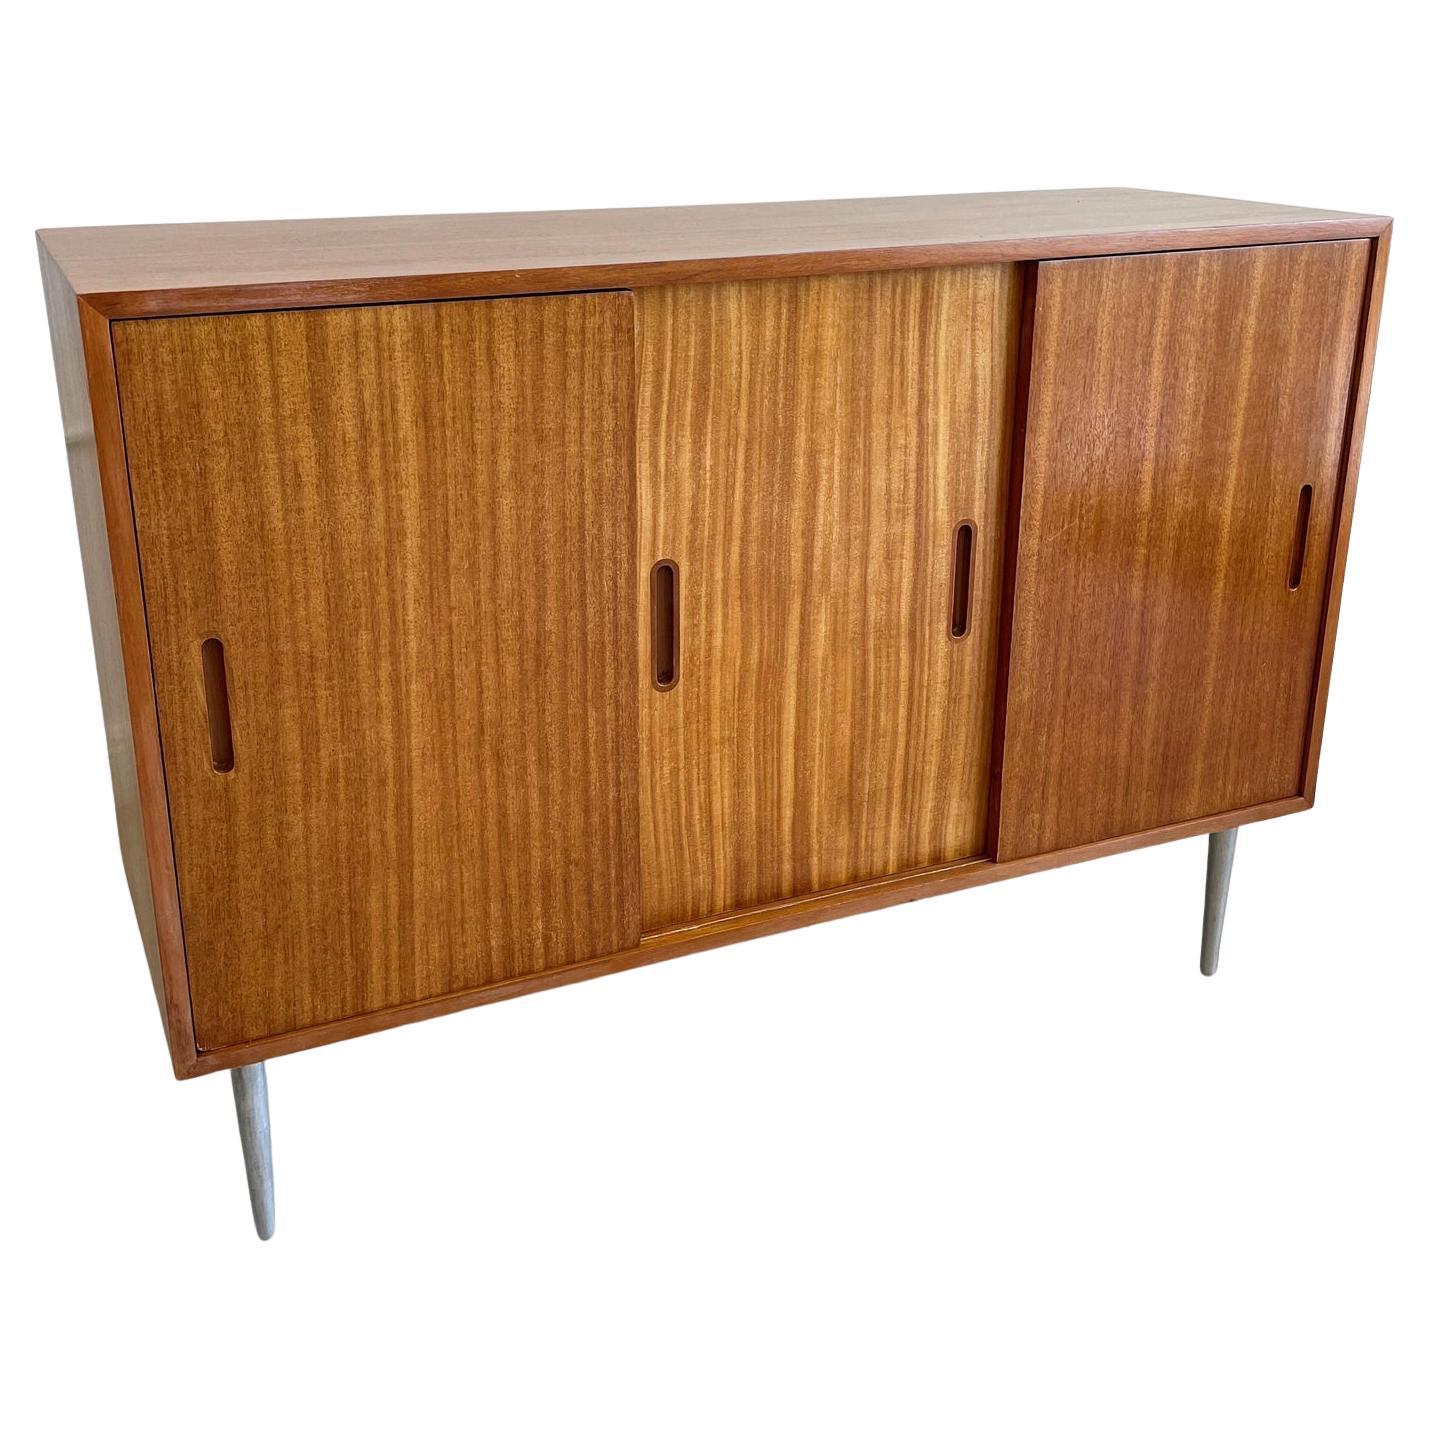 Rare Vintage Edward Wormley for Dunbar Double Sided Room Divider Credenza with S For Sale